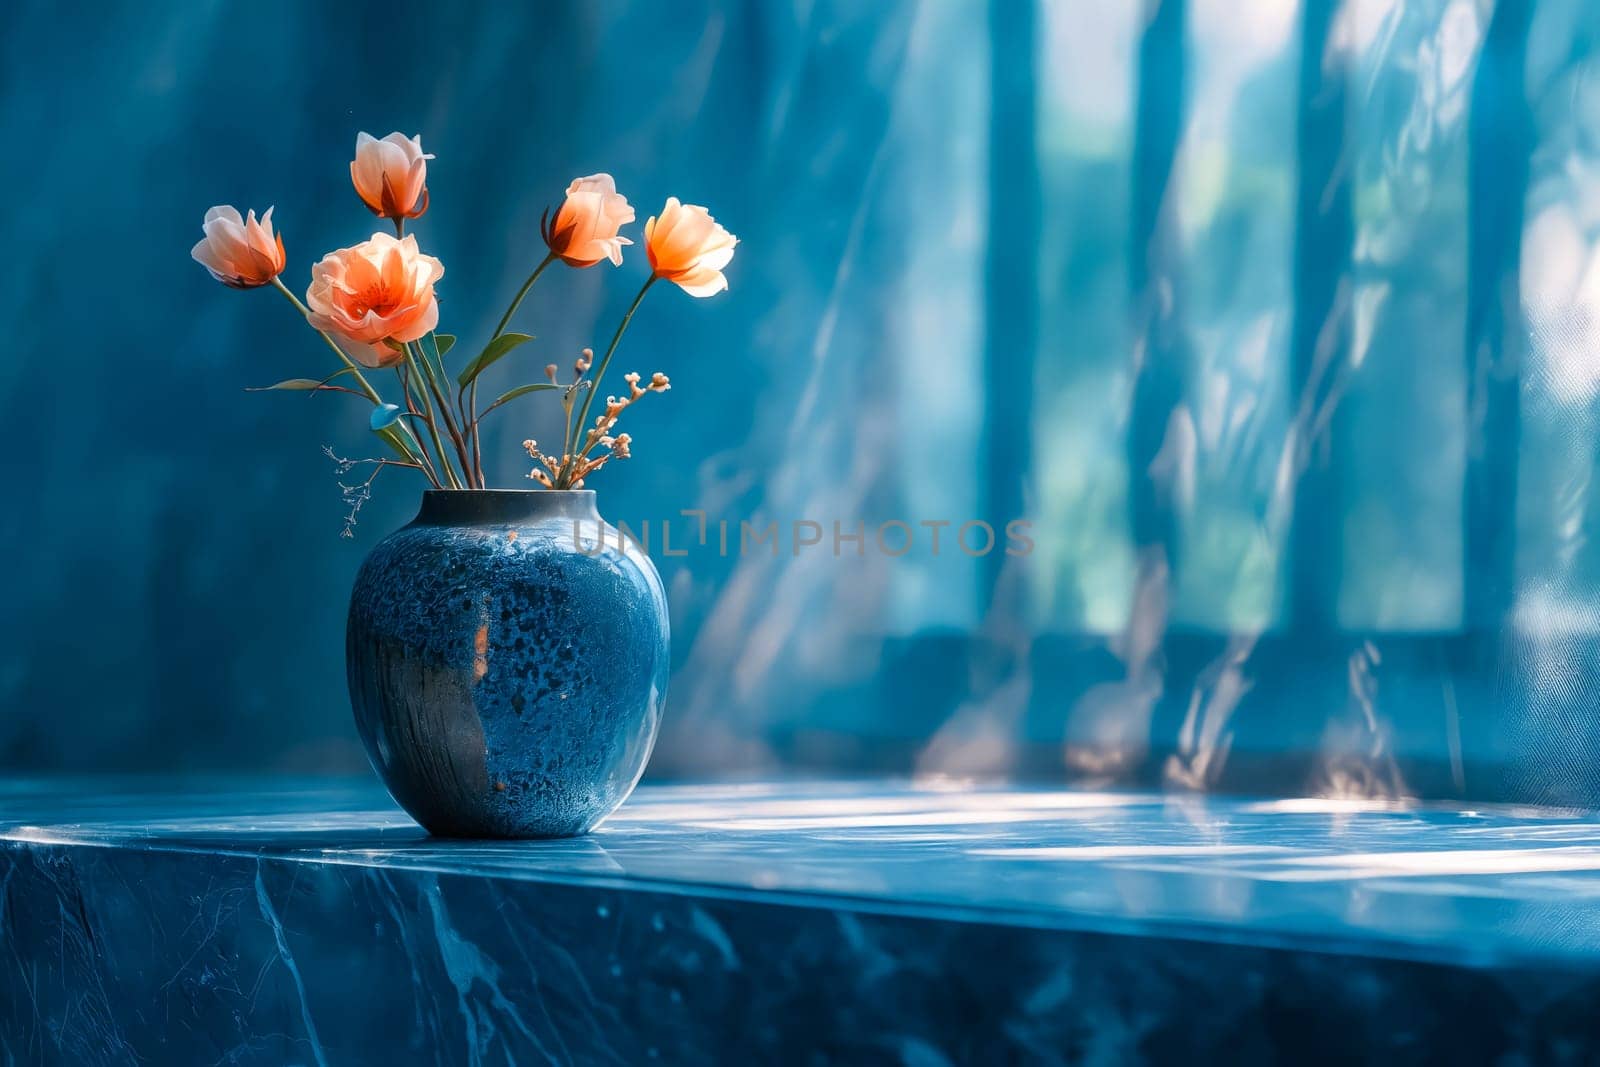 A blue vase with orange flowers sits on a marble countertop. The vase is filled with a variety of flowers, including pink and orange blossoms. The arrangement is simple yet elegant. Generative AI